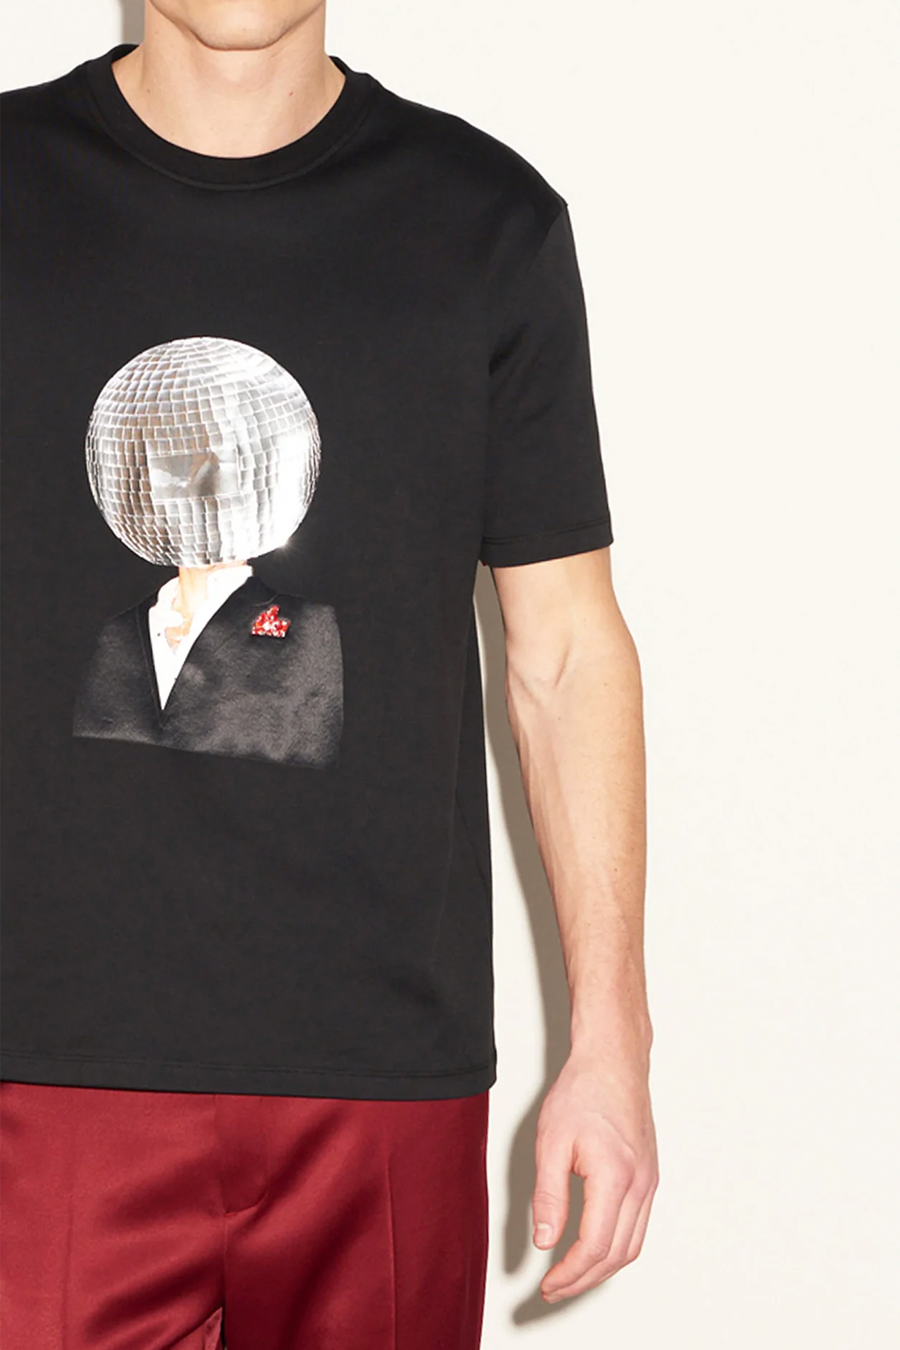 Buy the Limitato Disco Face T- Shirt Black at Intro. Spend £50 for free UK delivery. Official stockists. We ship worldwide.